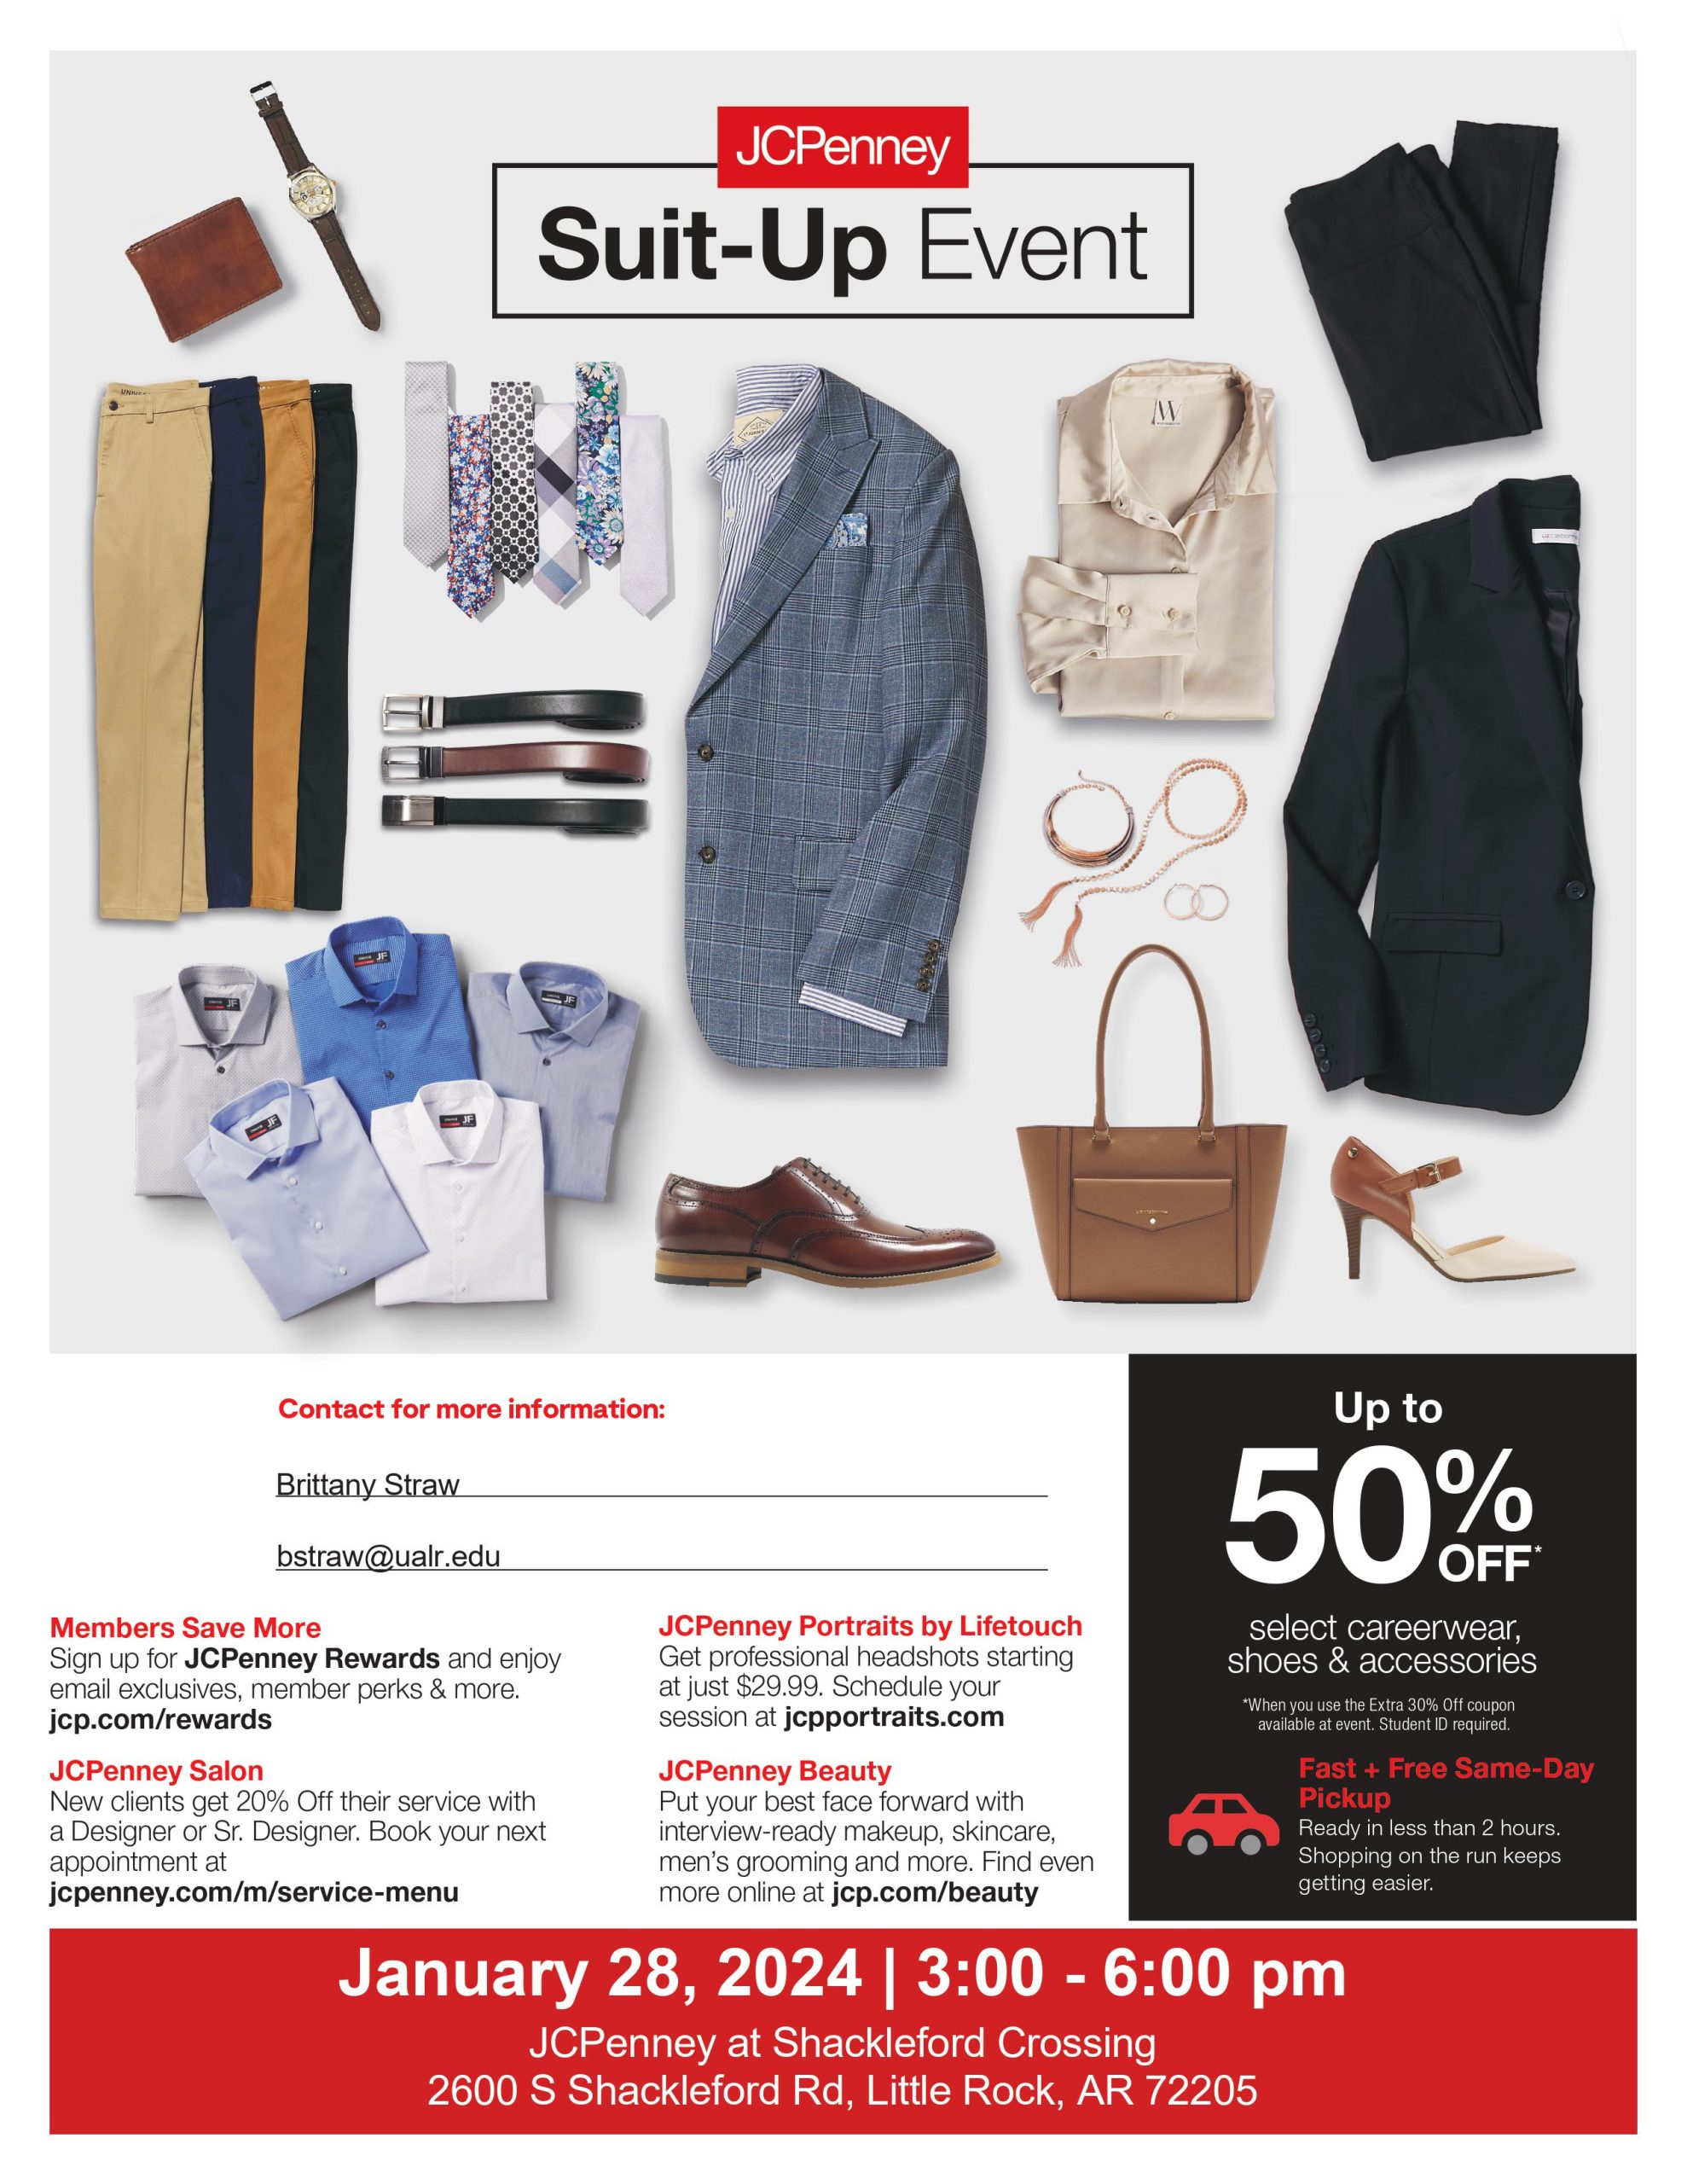 Suit-Up Event with JCPenney - Career Services - UA Little Rock